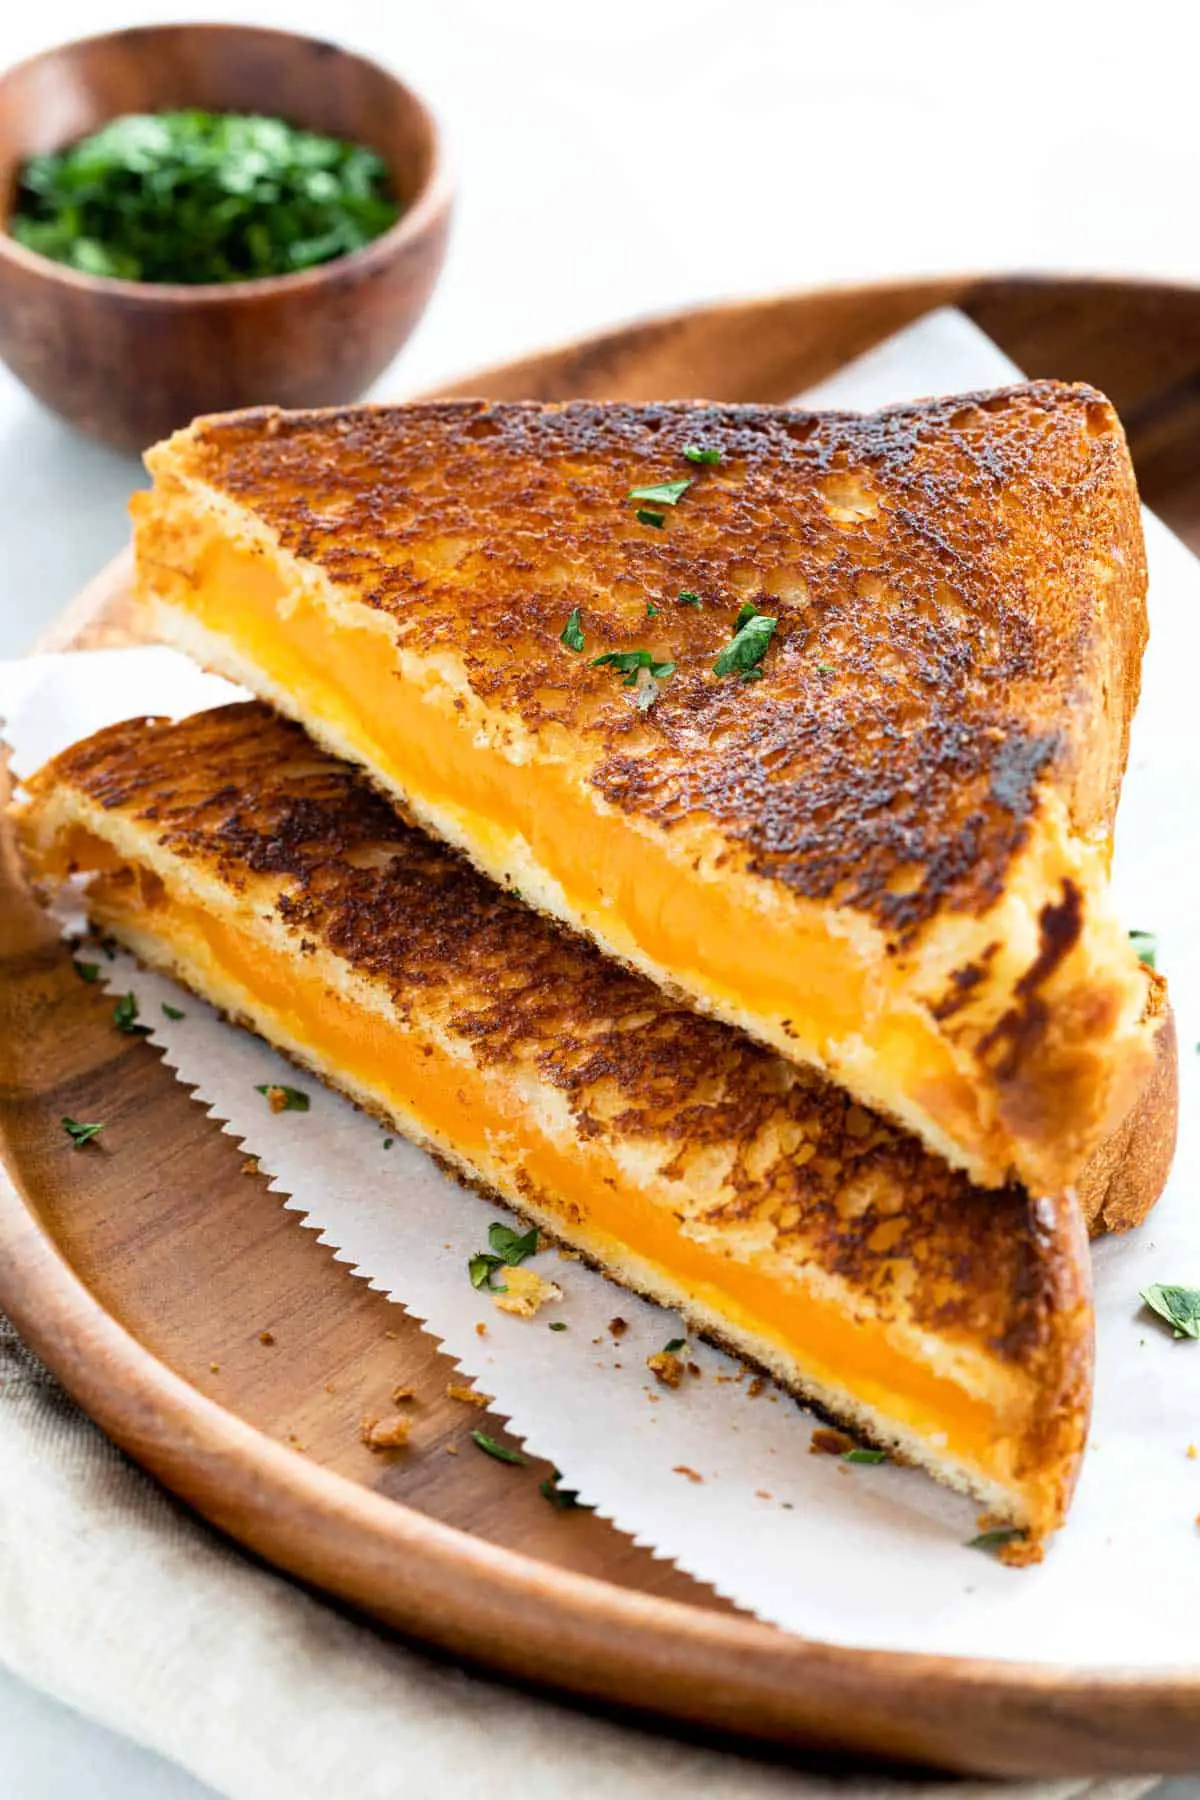 How to Make Grilled Cheese